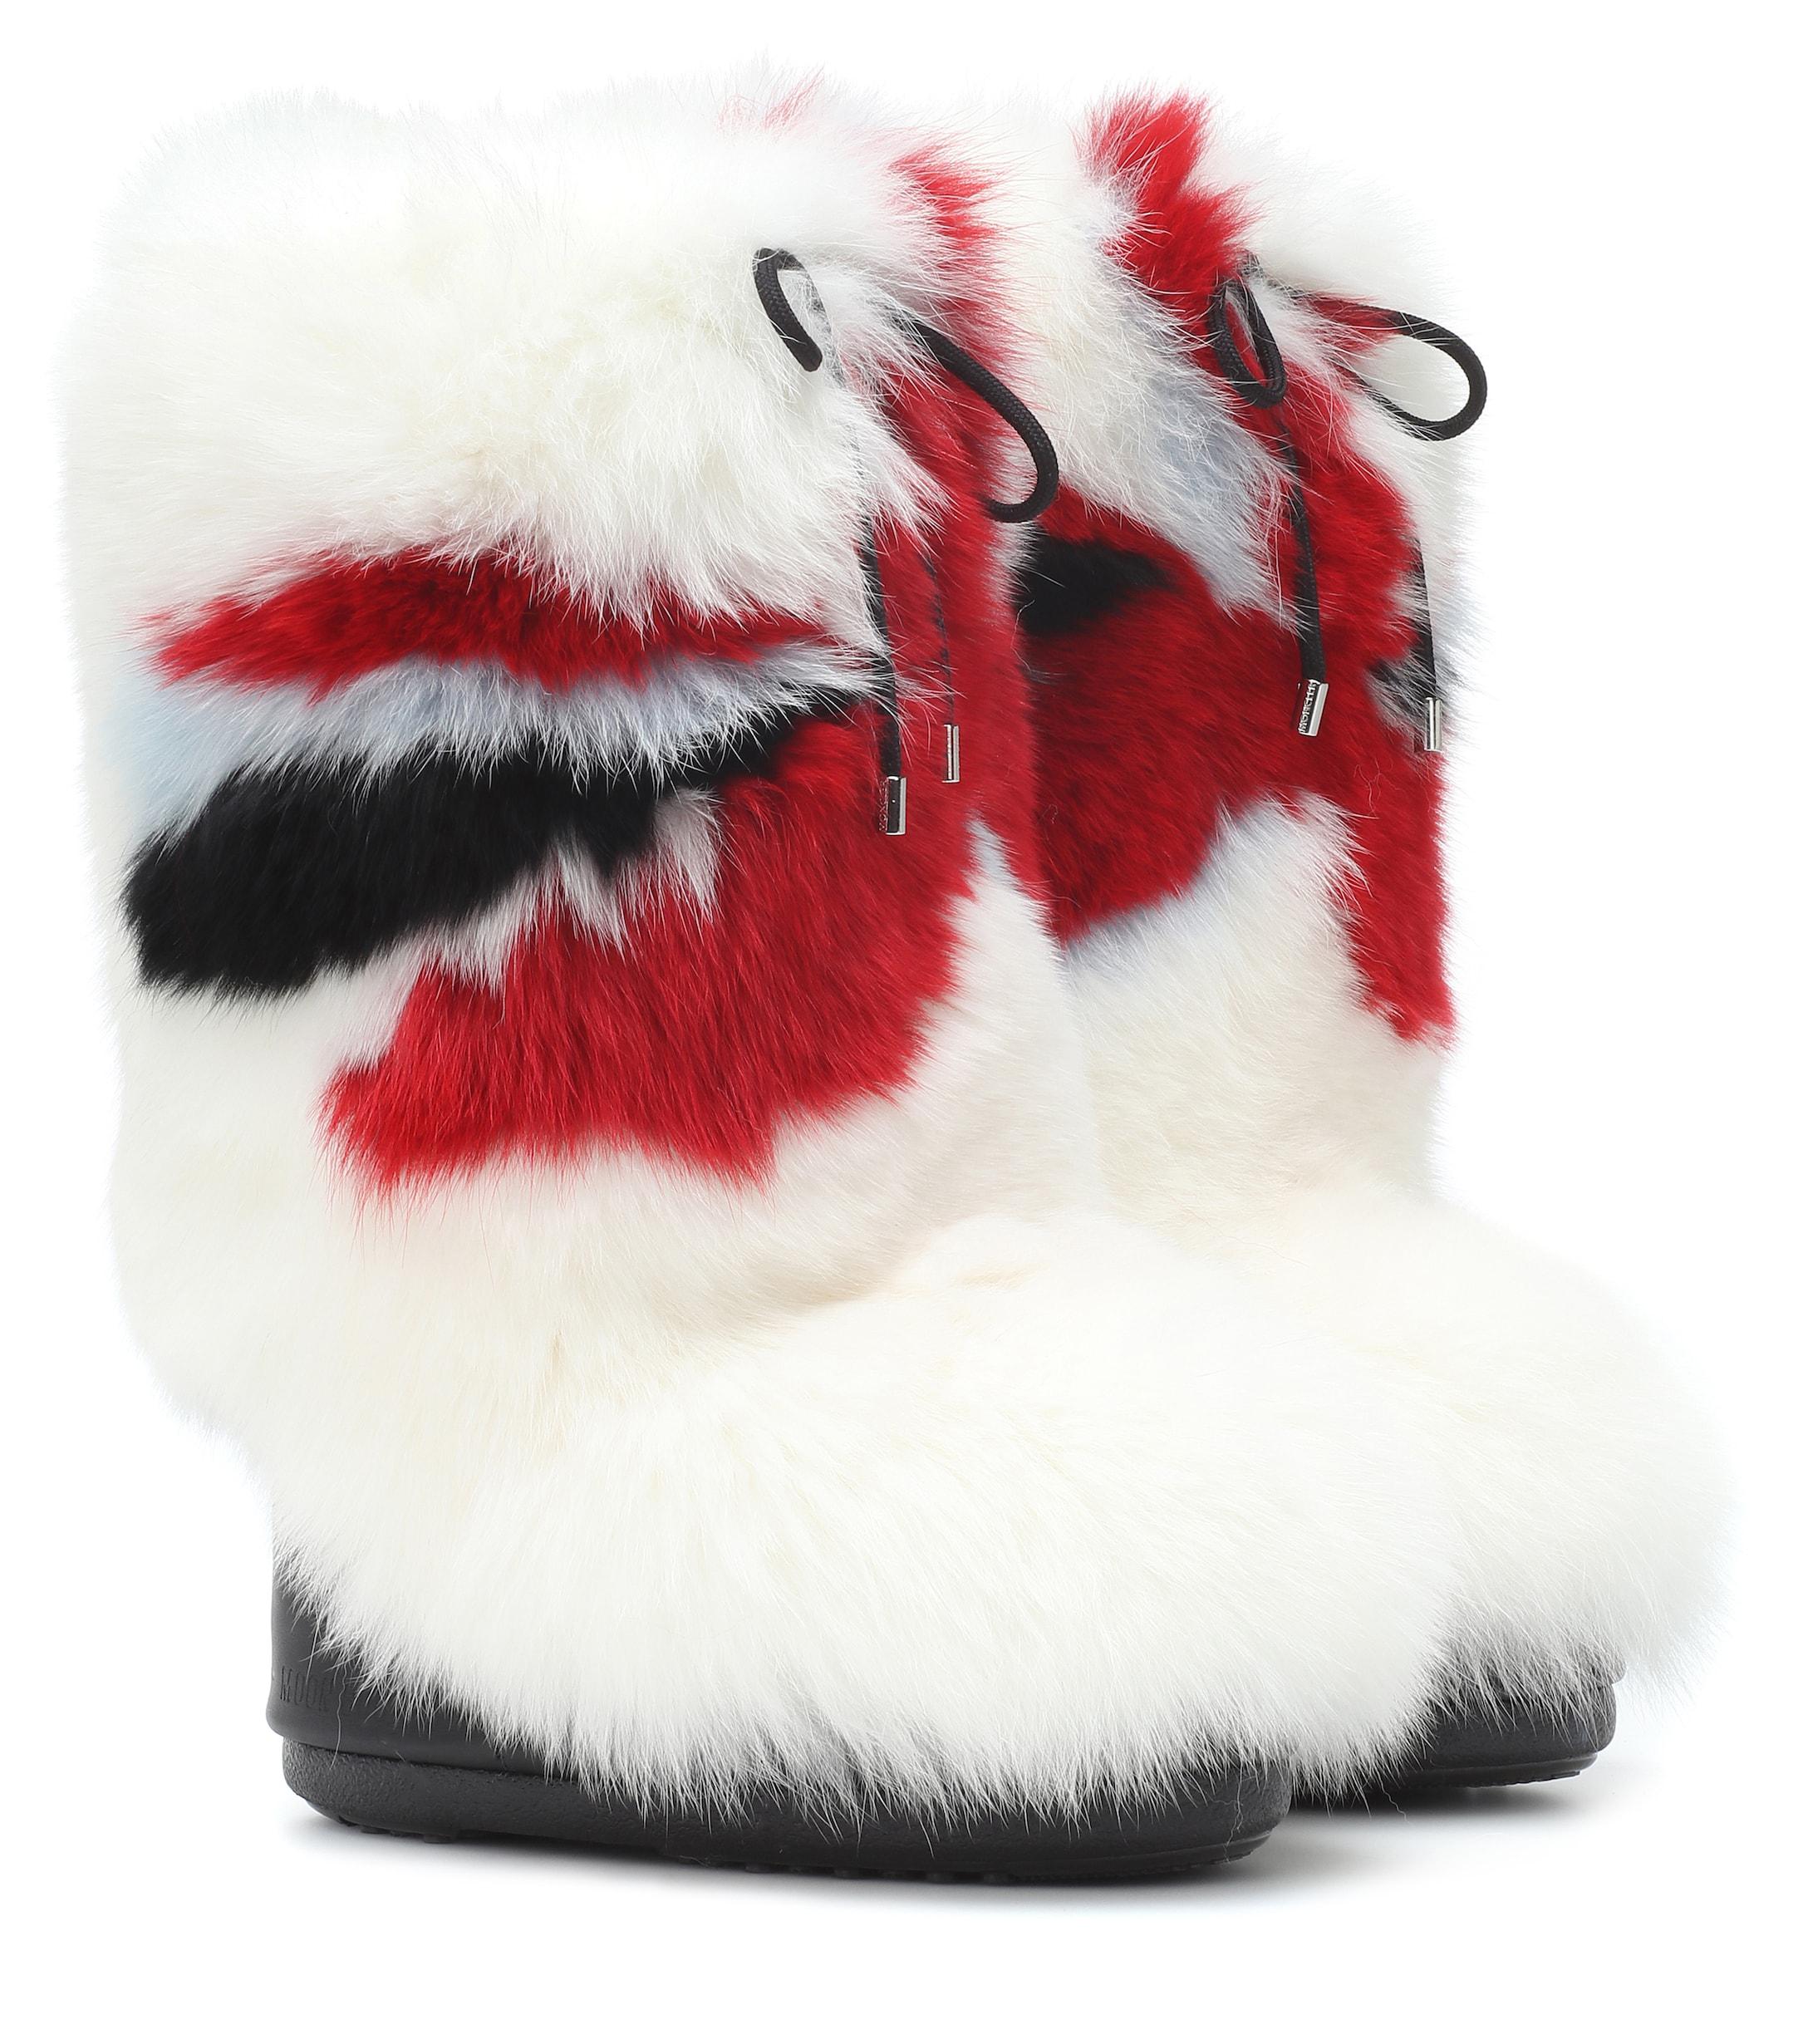 3 MONCLER GRENOBLE X Moon Boot® Fur Boots in White | Lyst